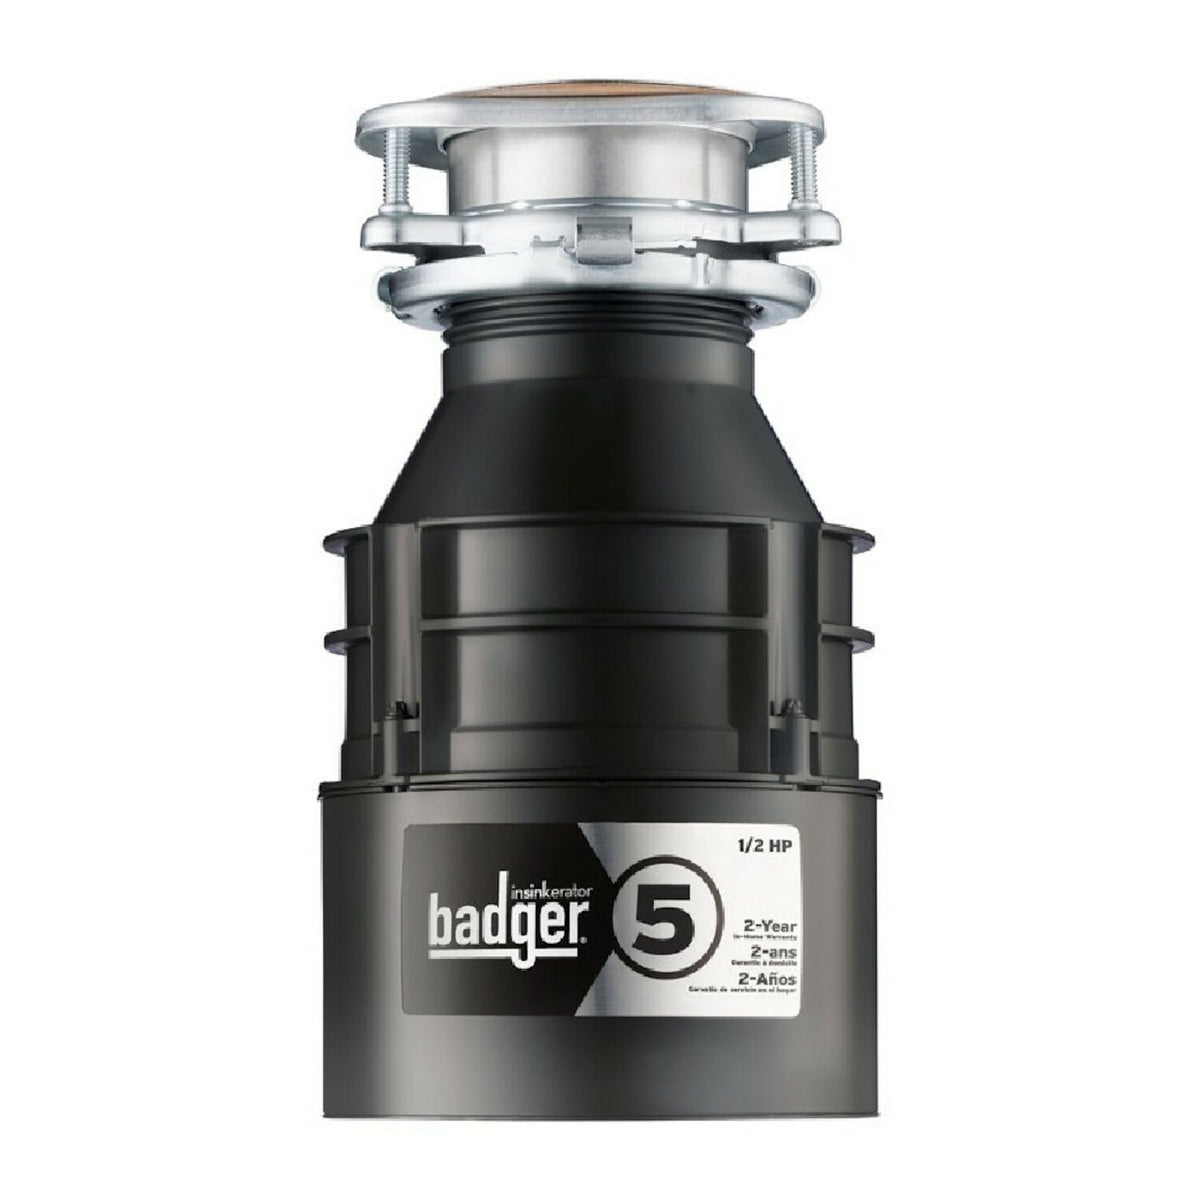 BADGER 5® FOOD WASTE DISPOSER WITH CORD